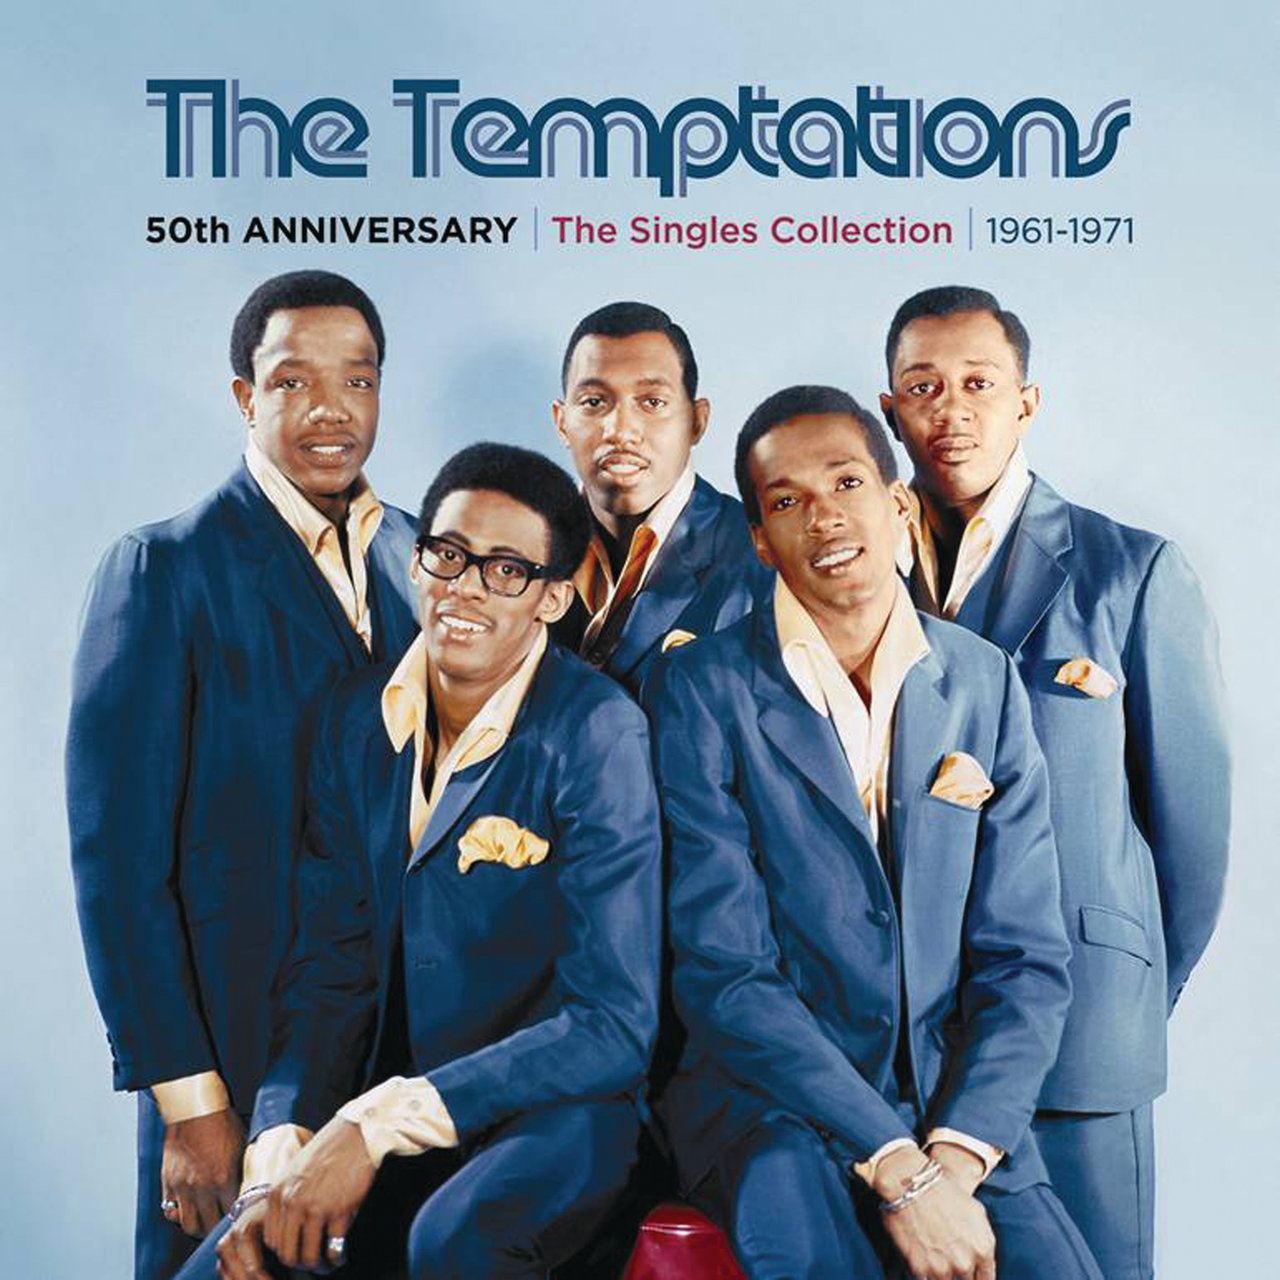 The Temptations - 50th Anniversary- The Singles Collection 1961-1971 NZBonly